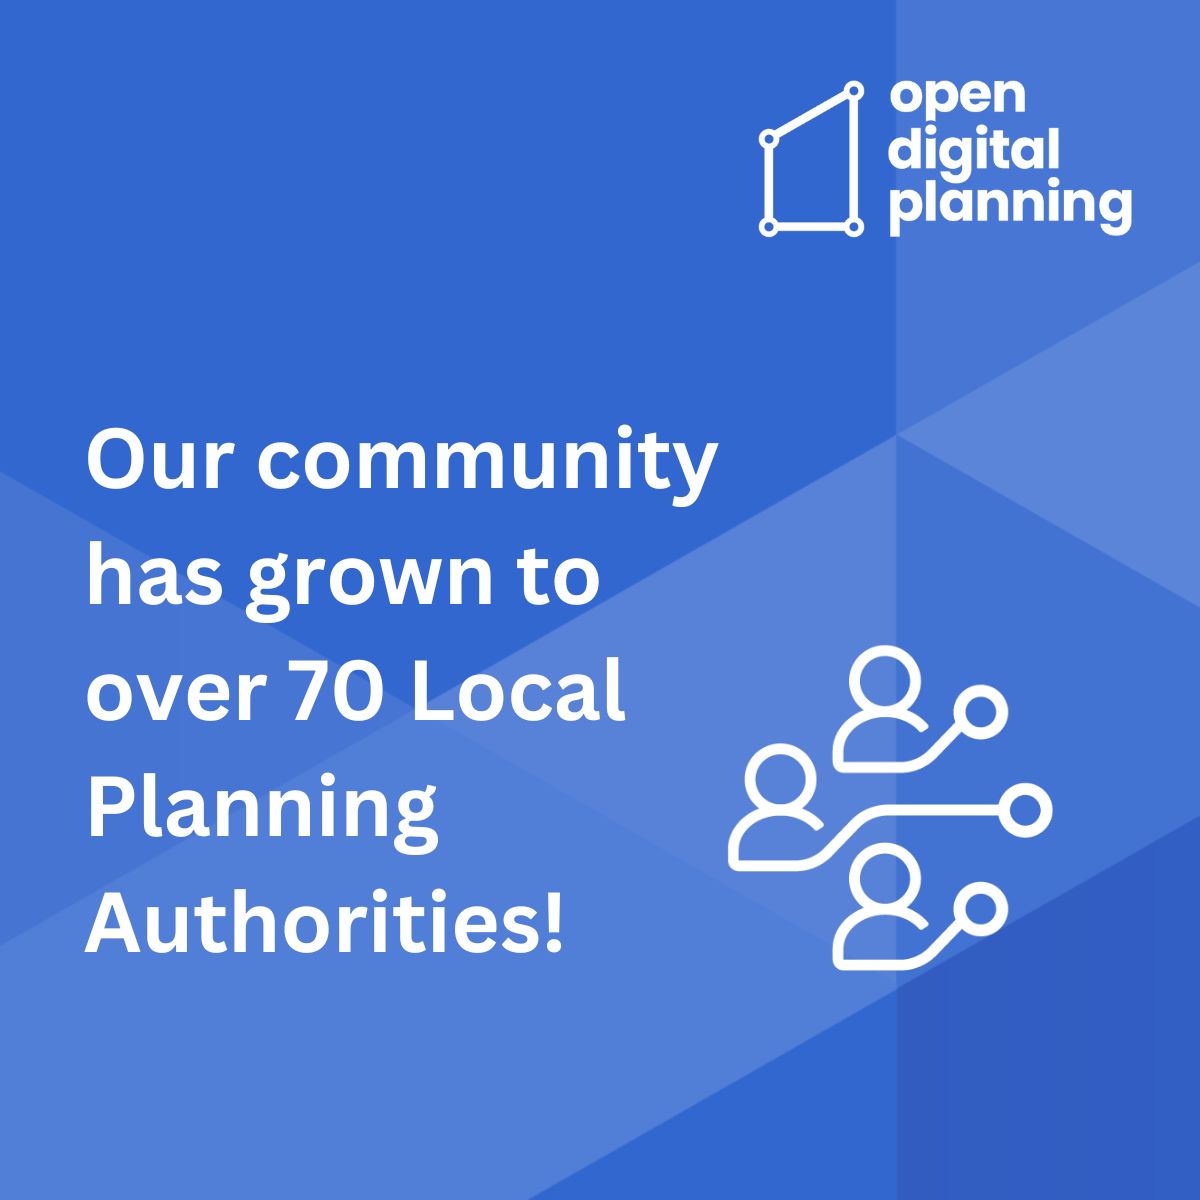 Our community has grown to over 70 Local Planning Authorities! 